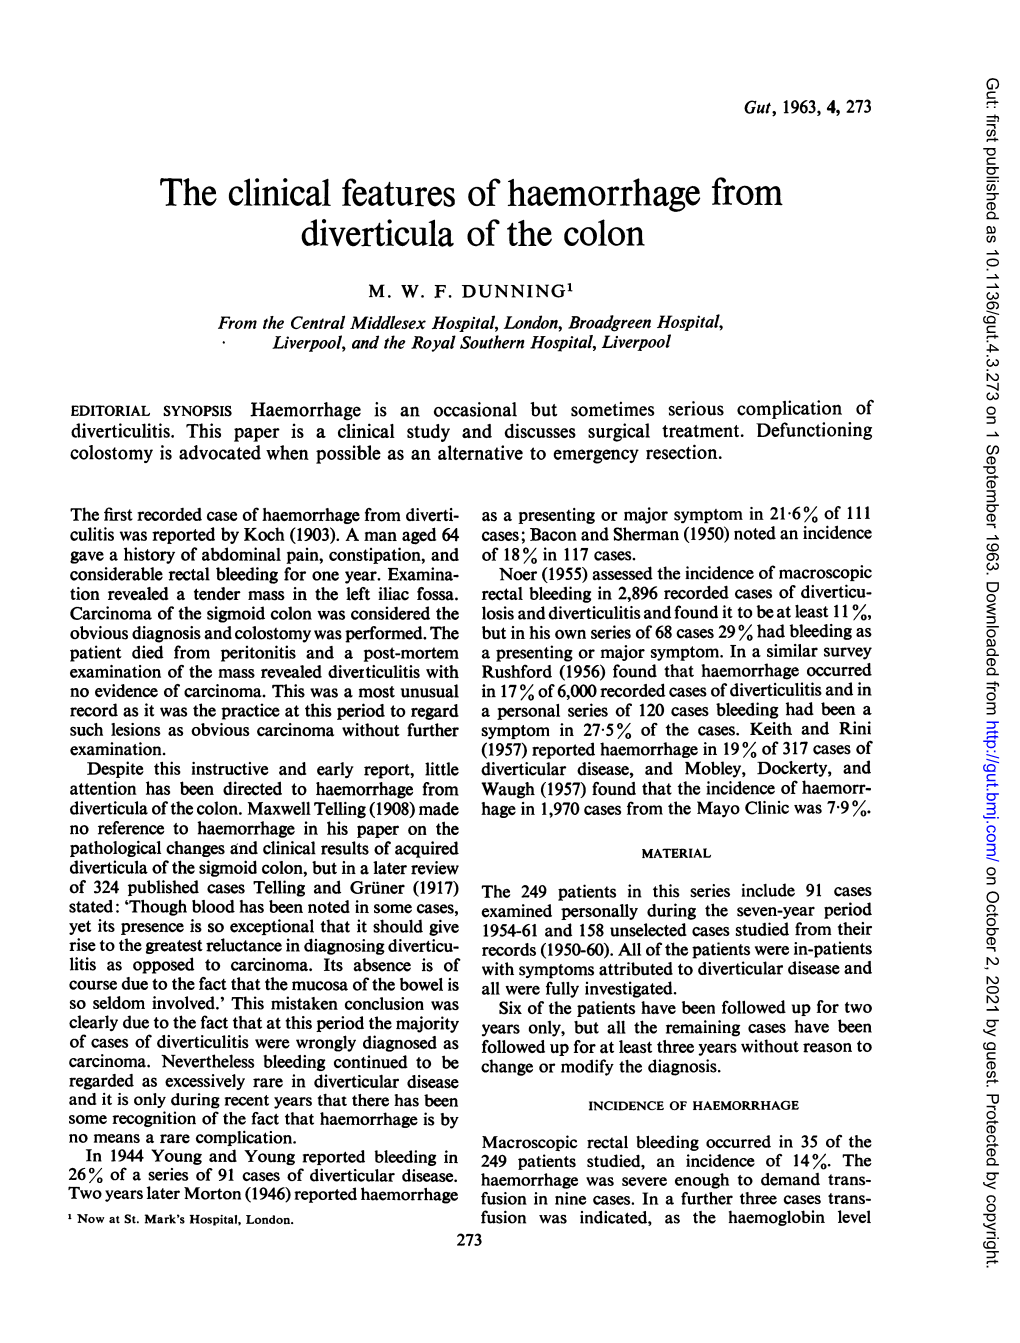 The Clinical Features of Haemorrhage from Diverticula Ofthe Colon